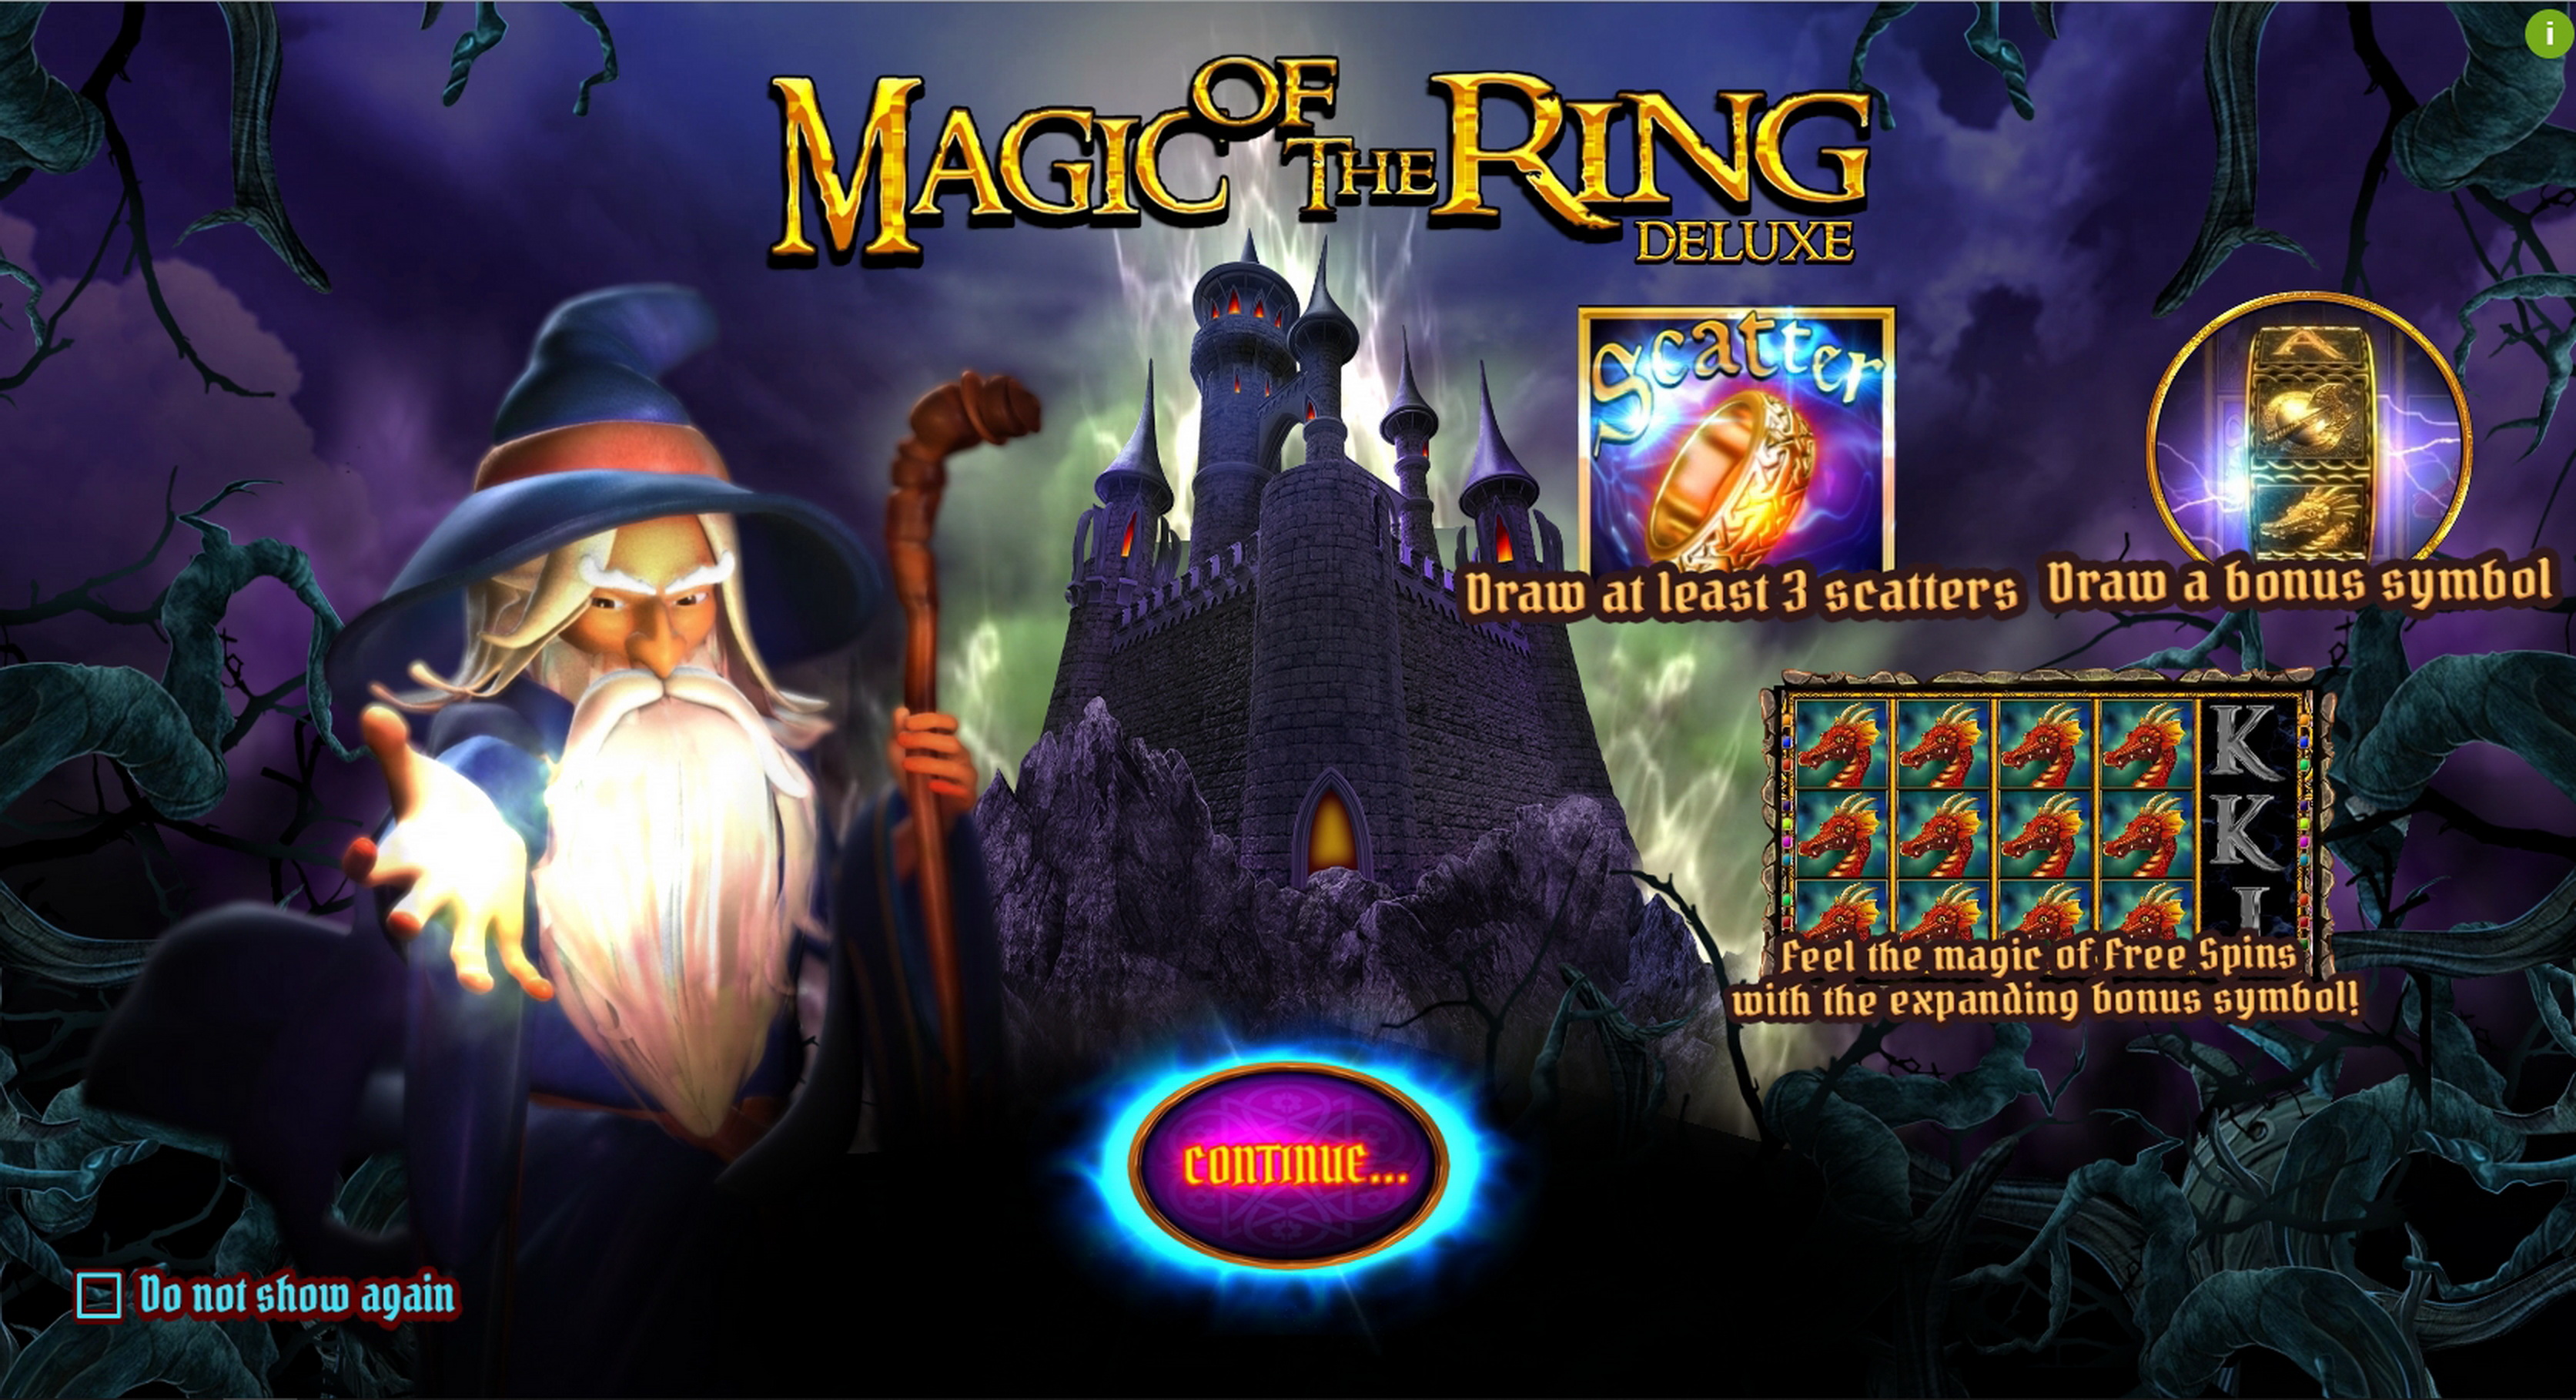 Play Magic of the Ring Deluxe Free Casino Slot Game by Wazdan